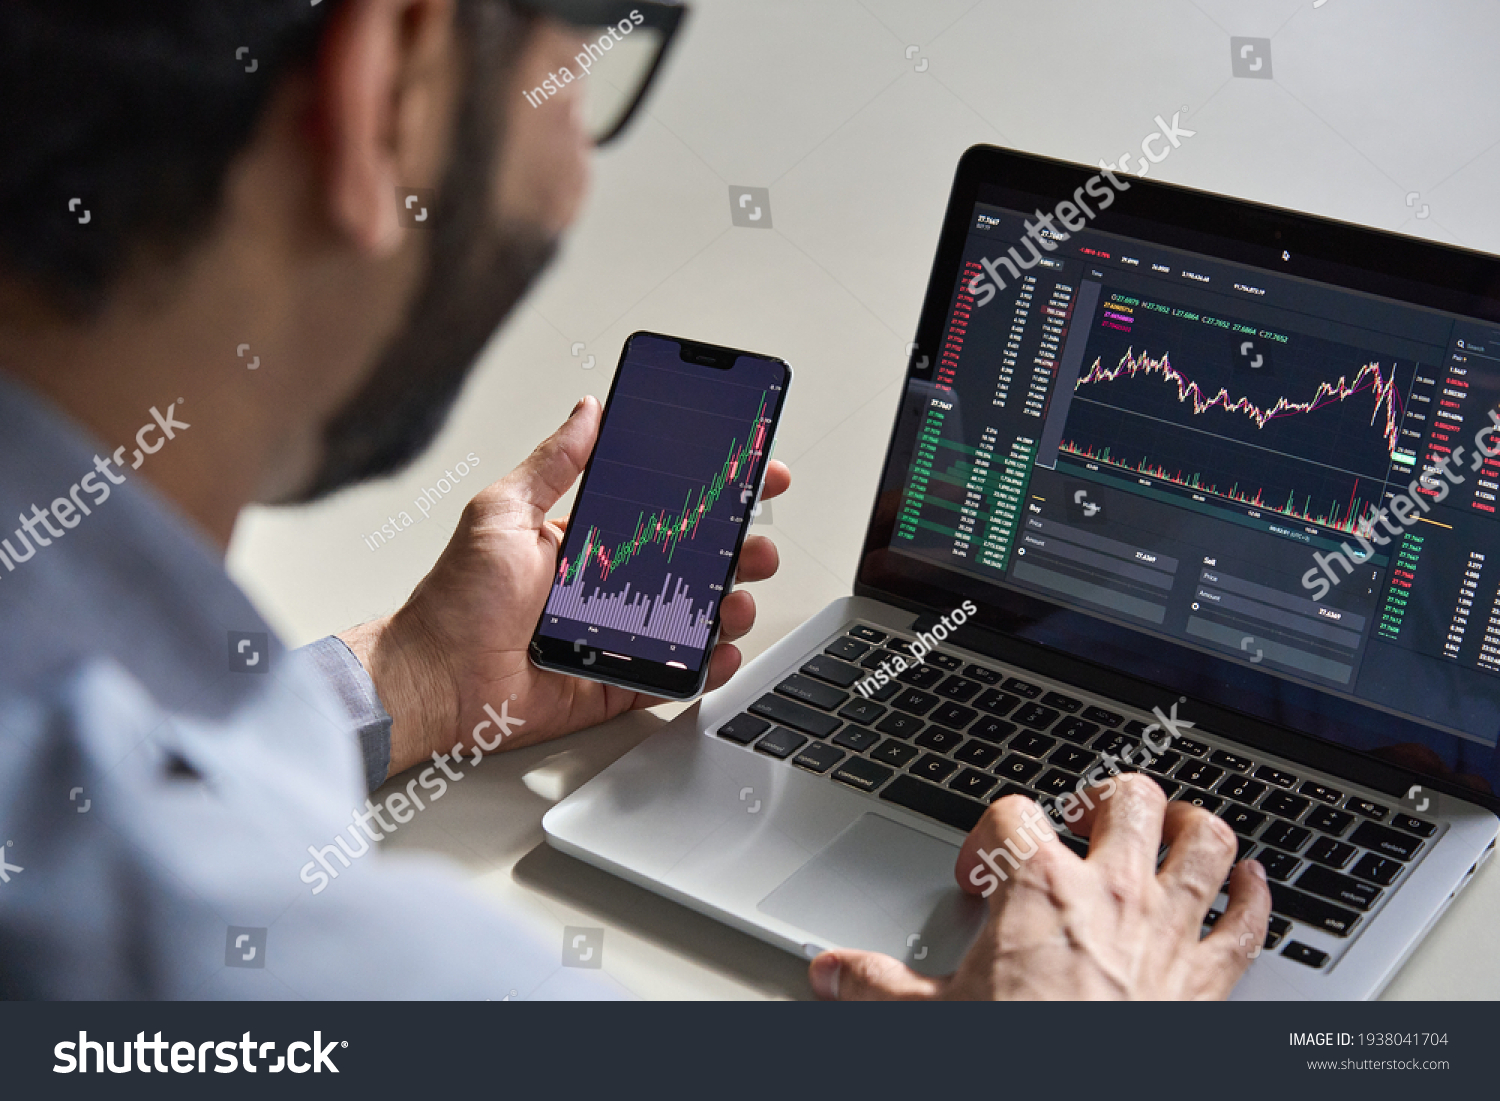 Business man trader investor analyst using mobile phone app analytics for cryptocurrency financial market analysis, trading data index chart graph on smartphone and laptop screen. Over shoulder view #1938041704